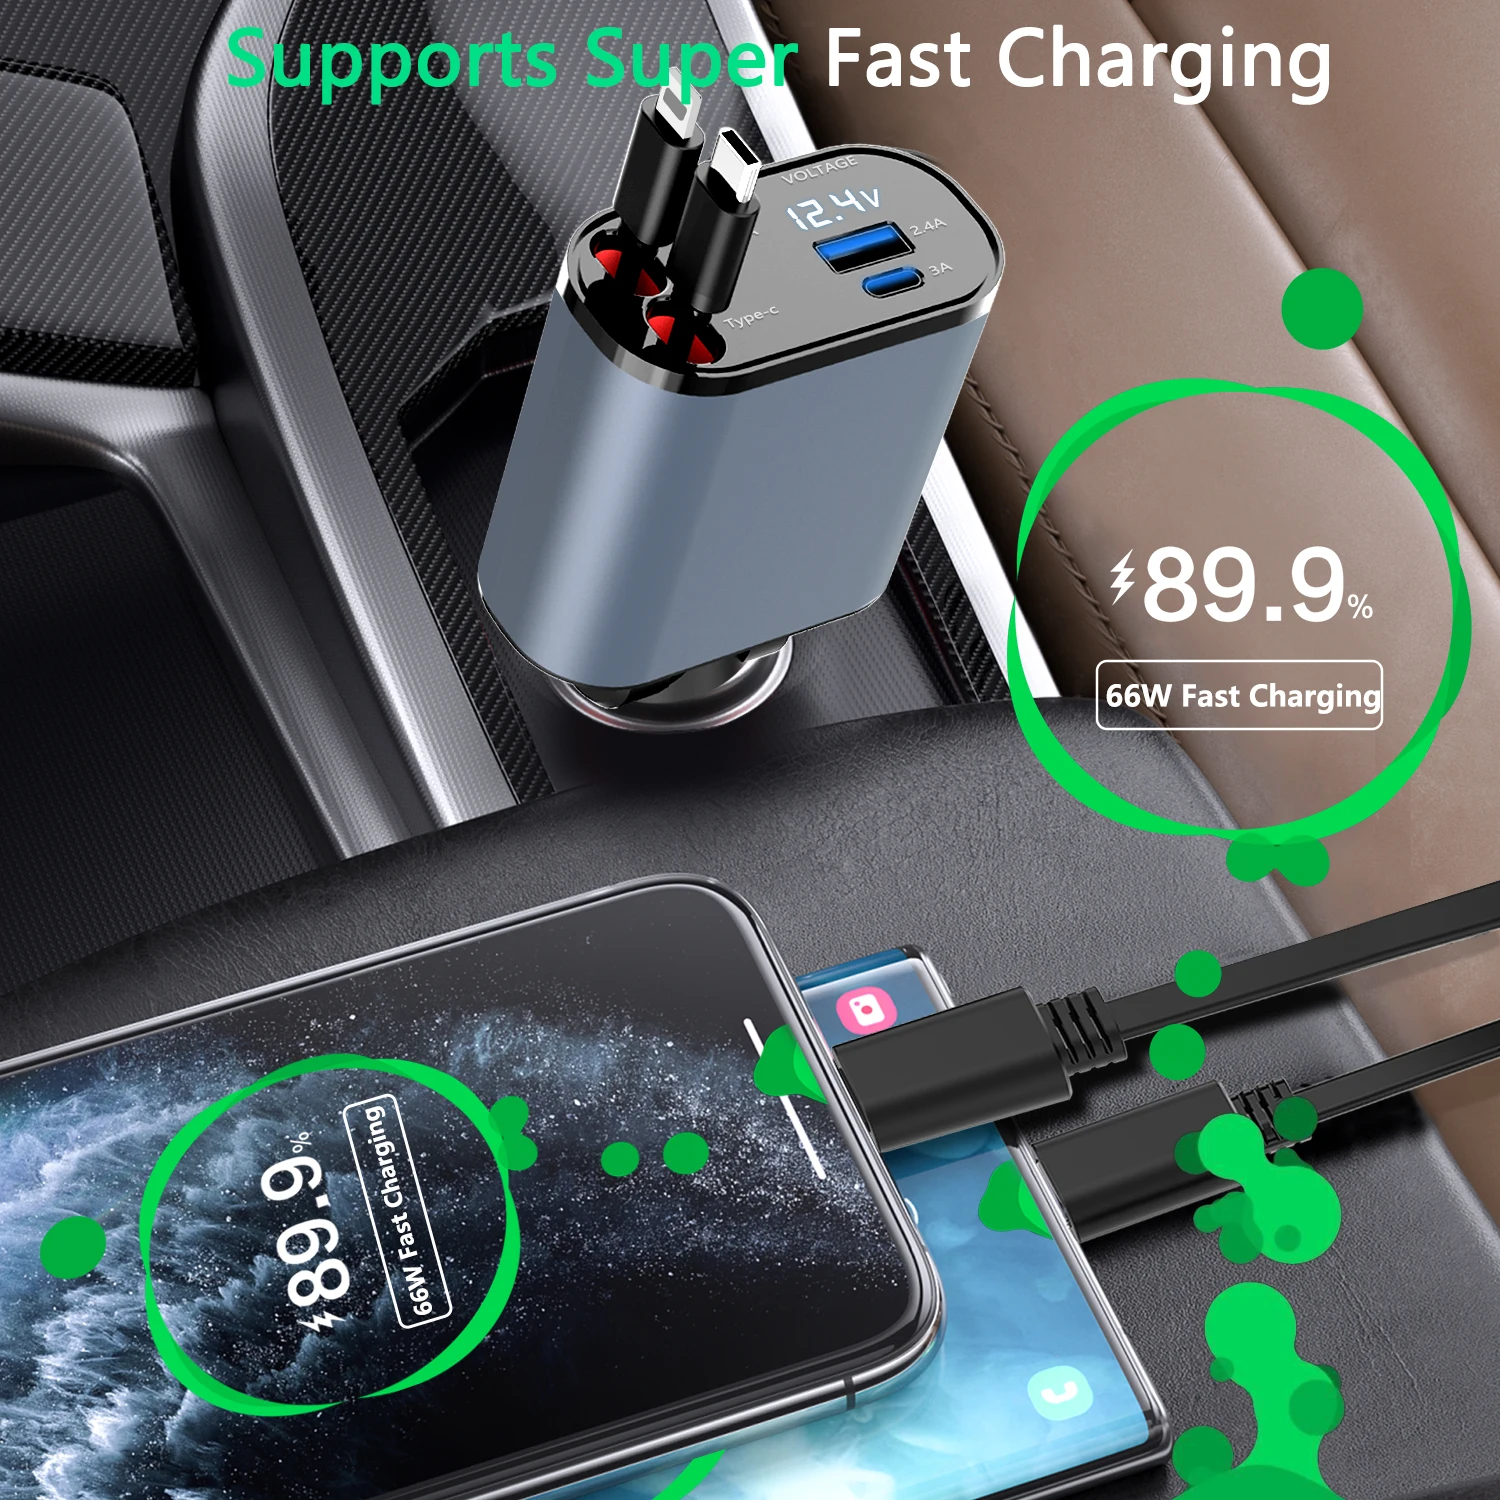 4 in1 Fast Charger 100W Retractable Car Charger USB Type C Cable For IPhone Samsung Fast Charge Cord Cigarette Lighter Adapter